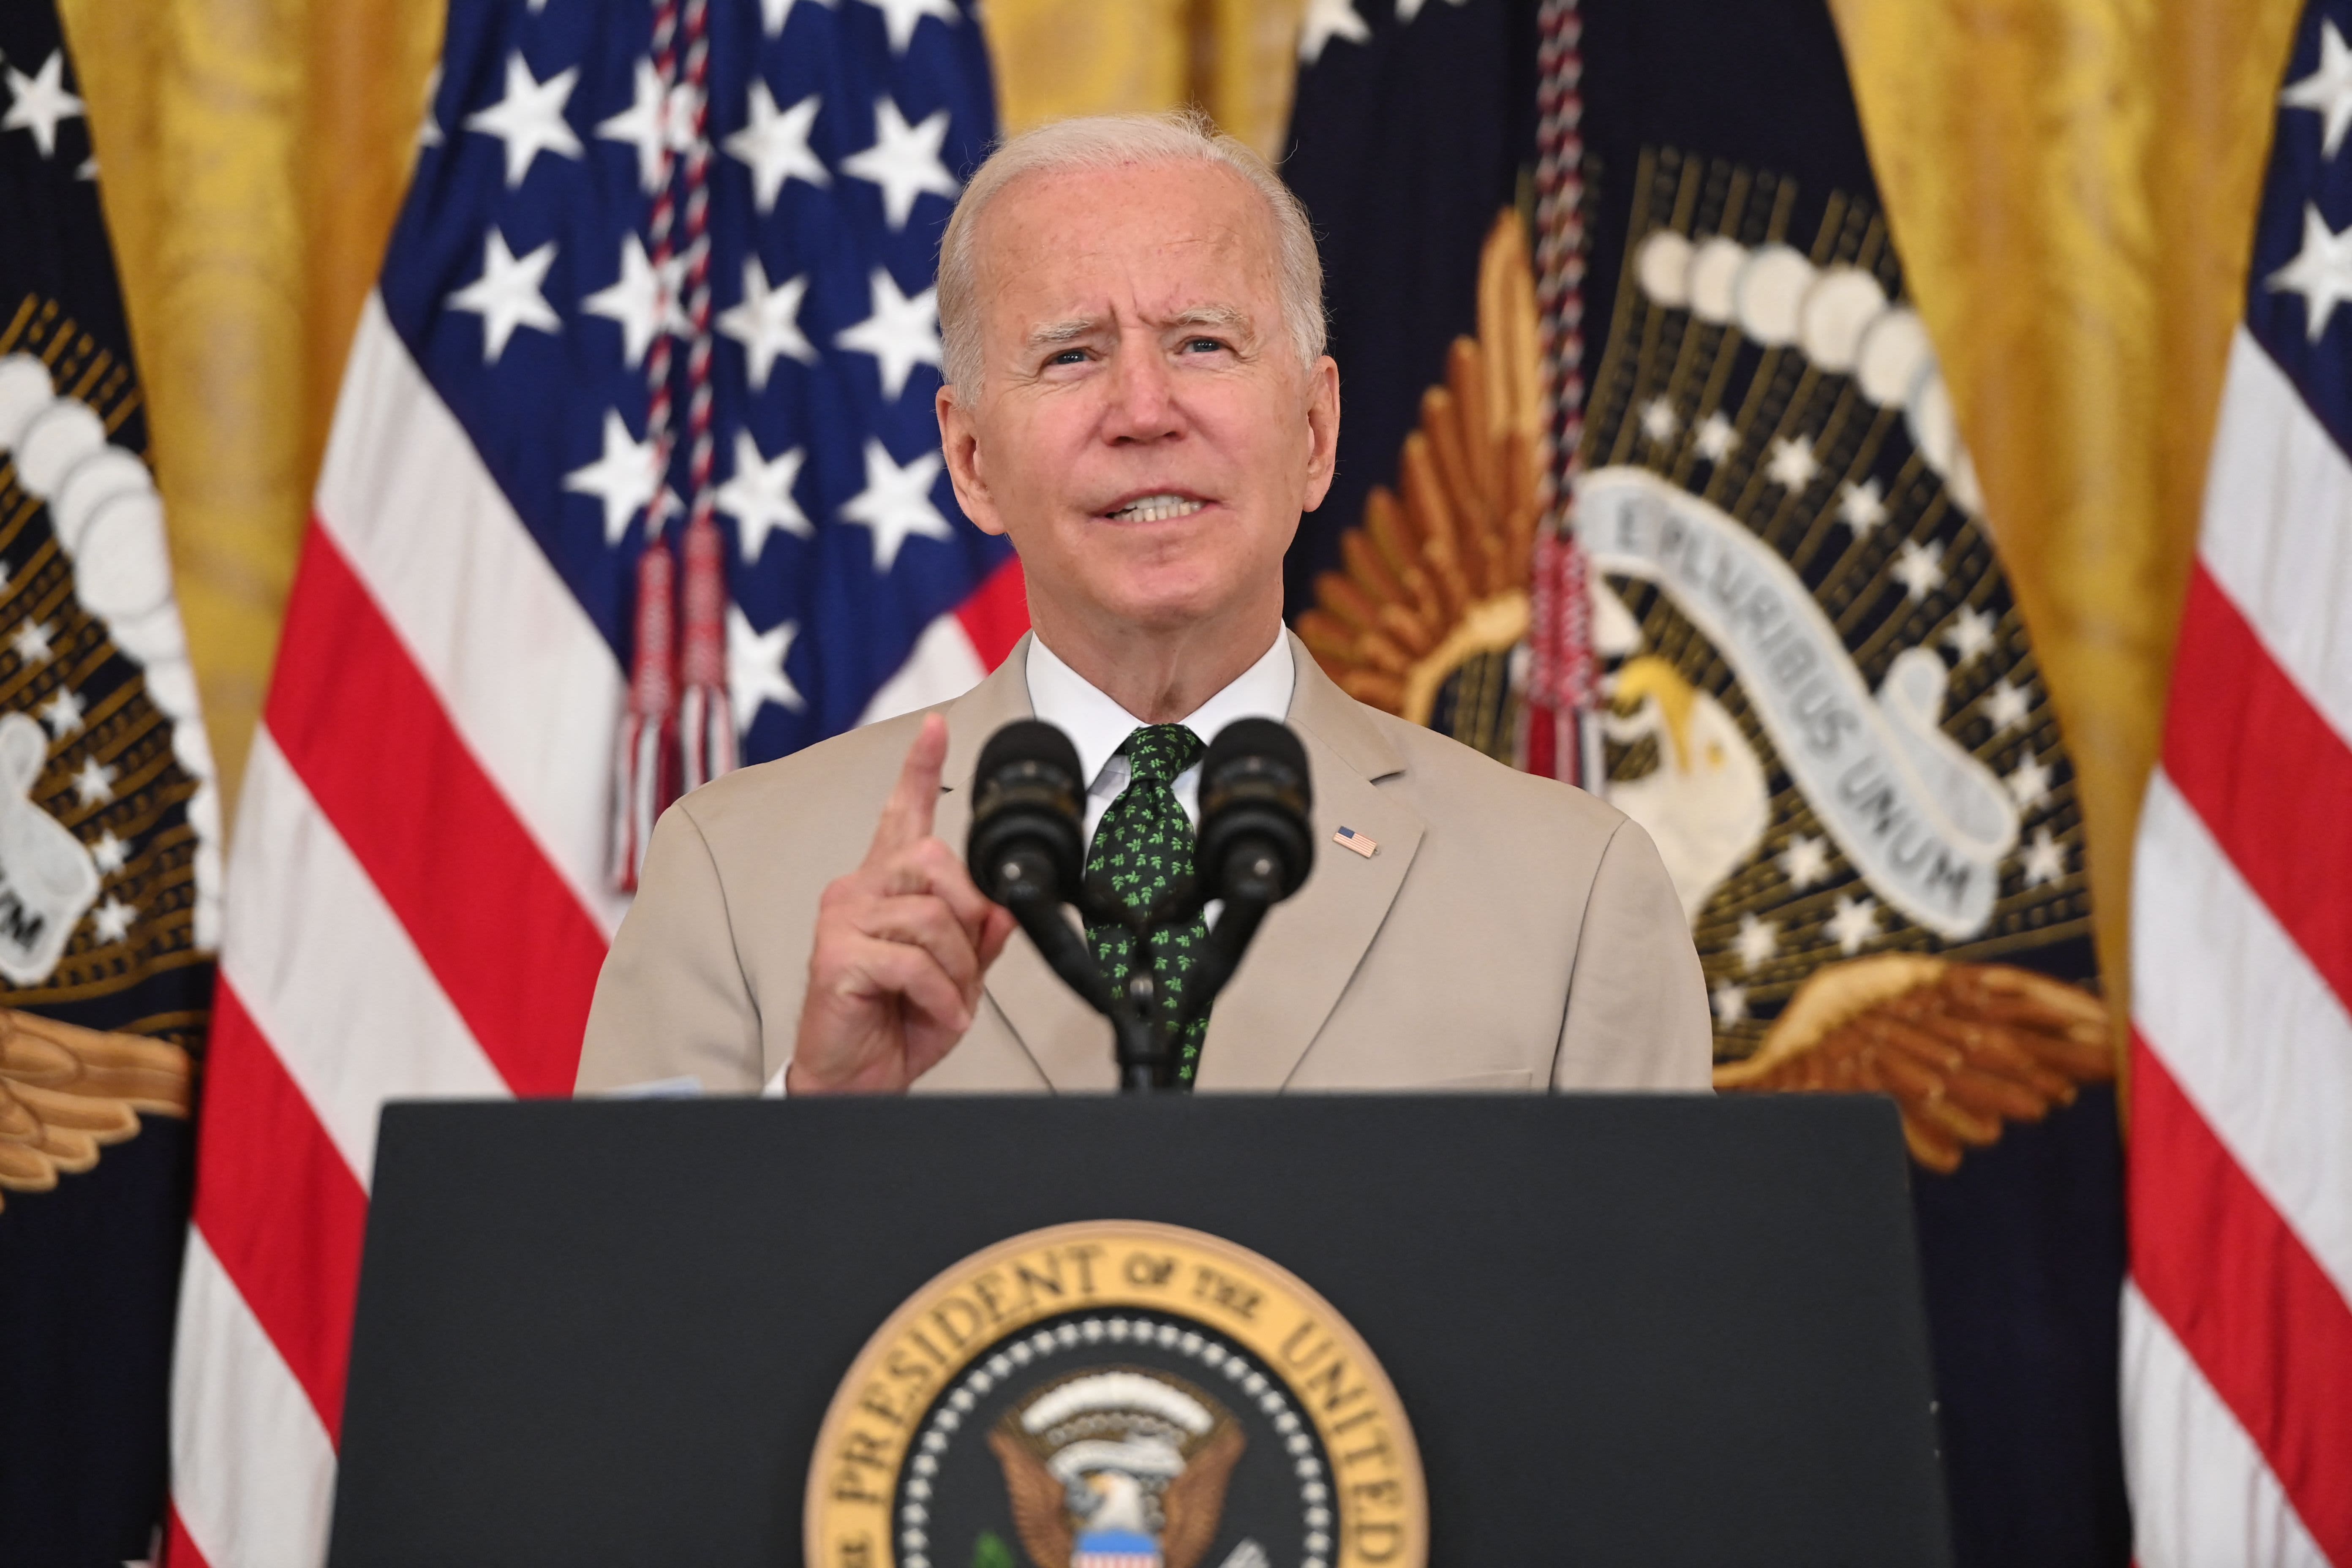 Biden skips victory lap after strong July jobs report, warns of economic peril from rising Covid cases